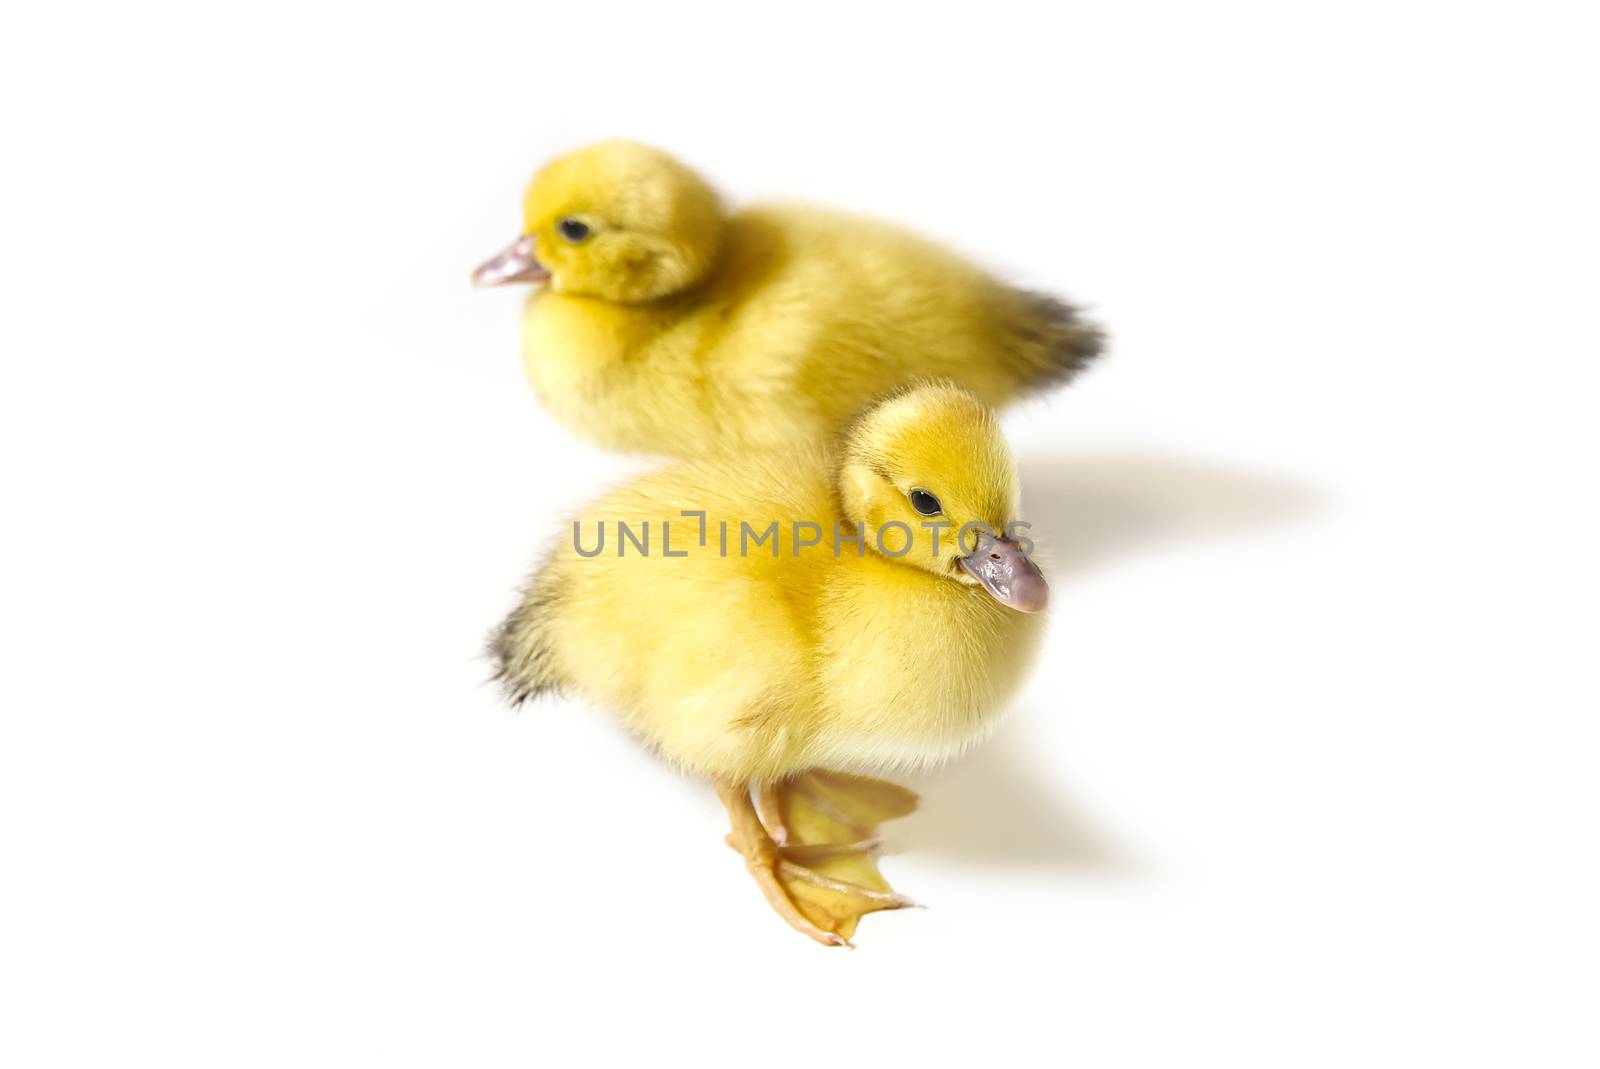 Few days old two yellow duckling isolated on white